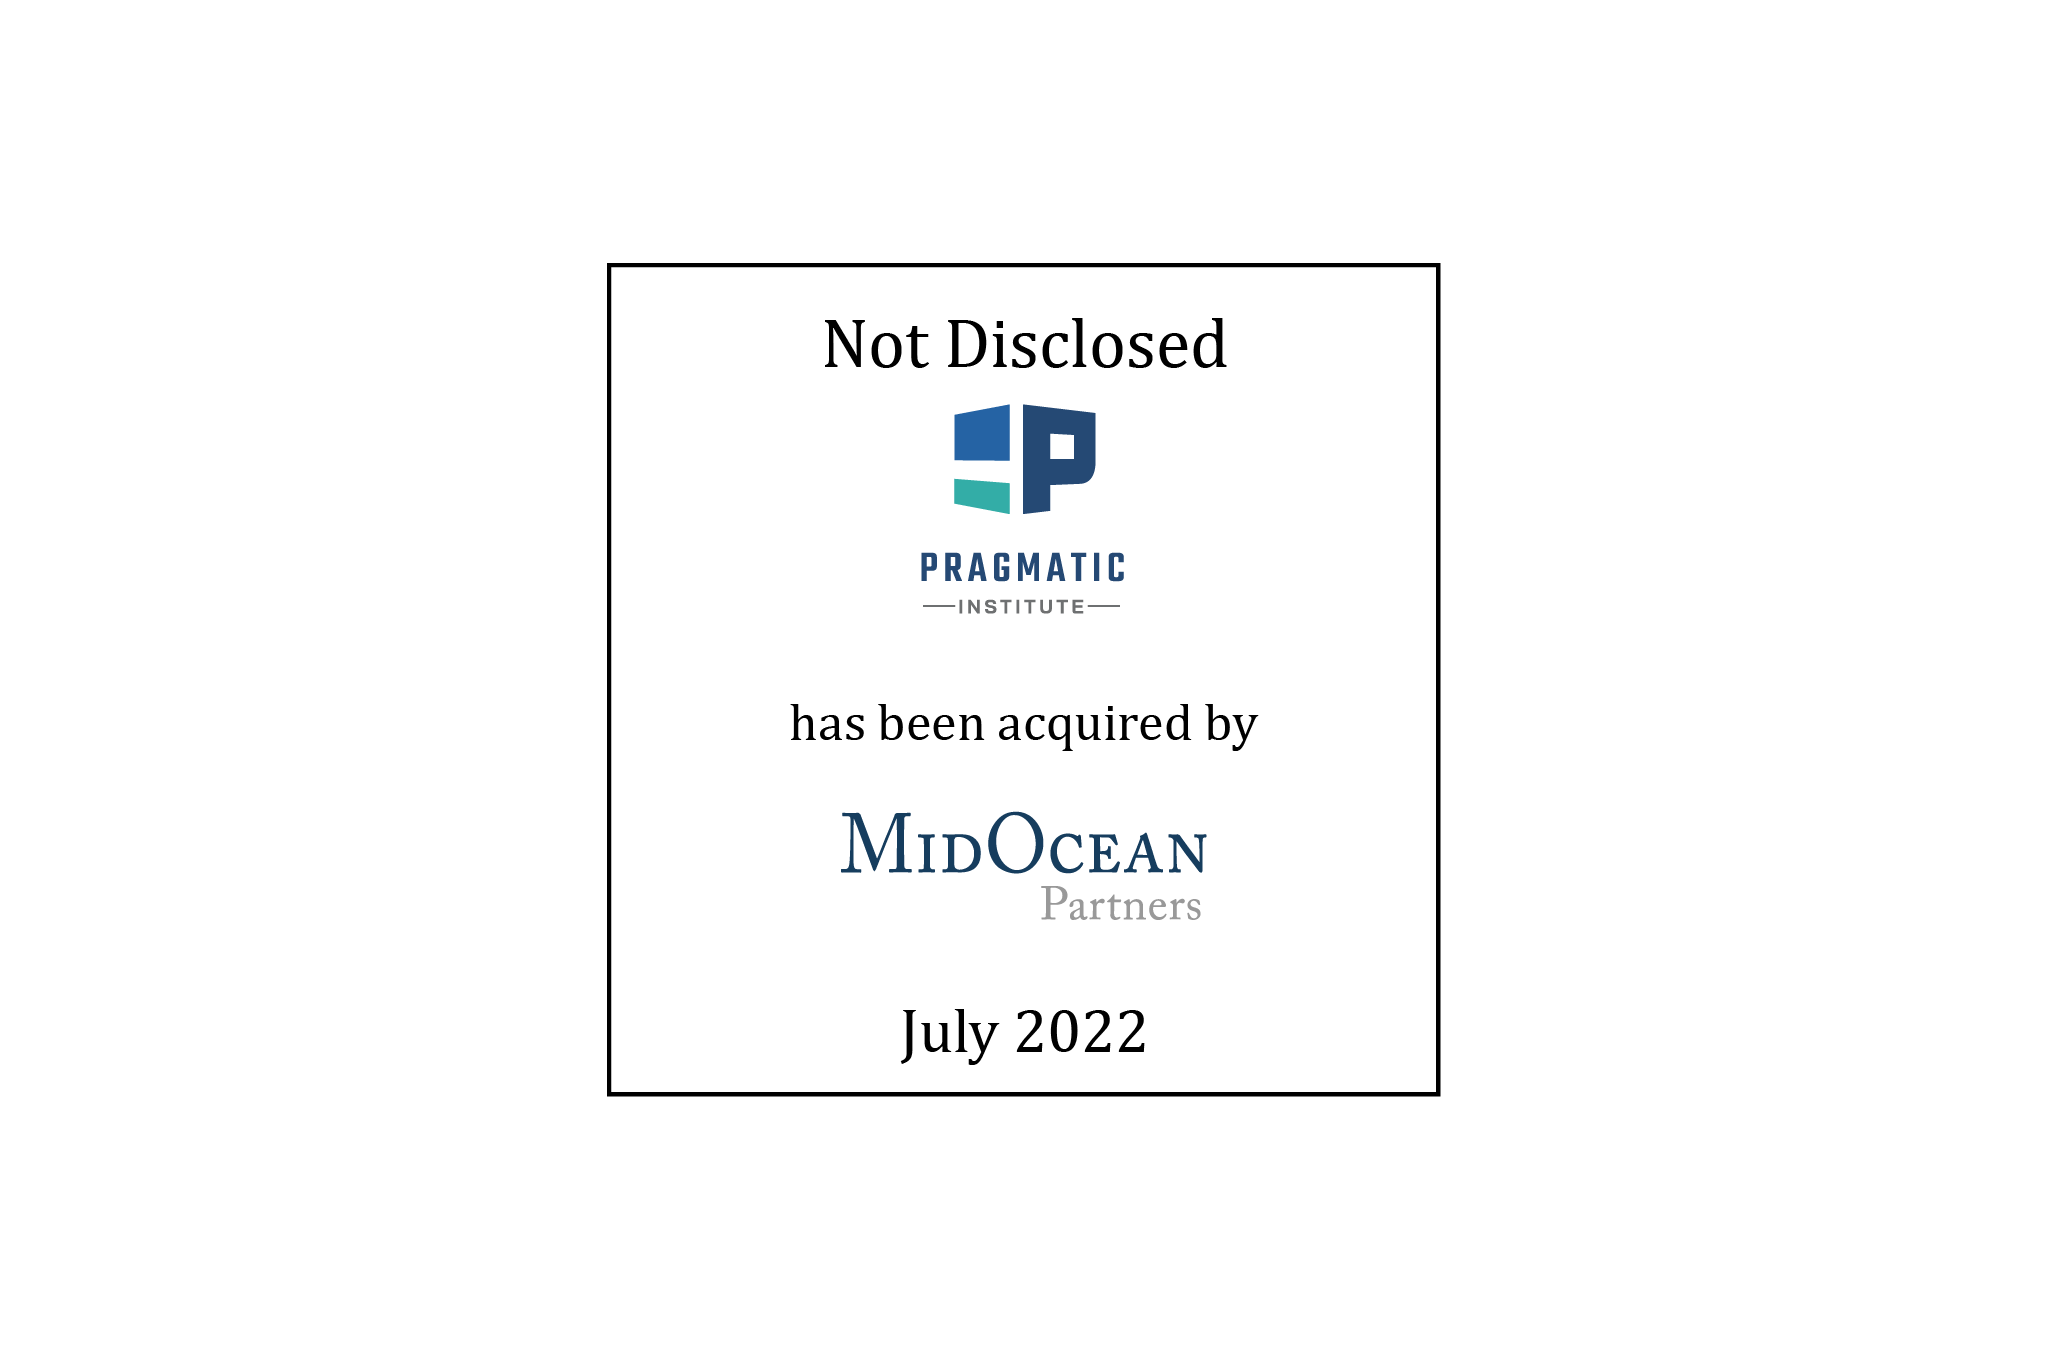 Not Disclosed | Pragmatic Institute (logo) has been Acquired by MidOcean Partners (logo) | July 2022